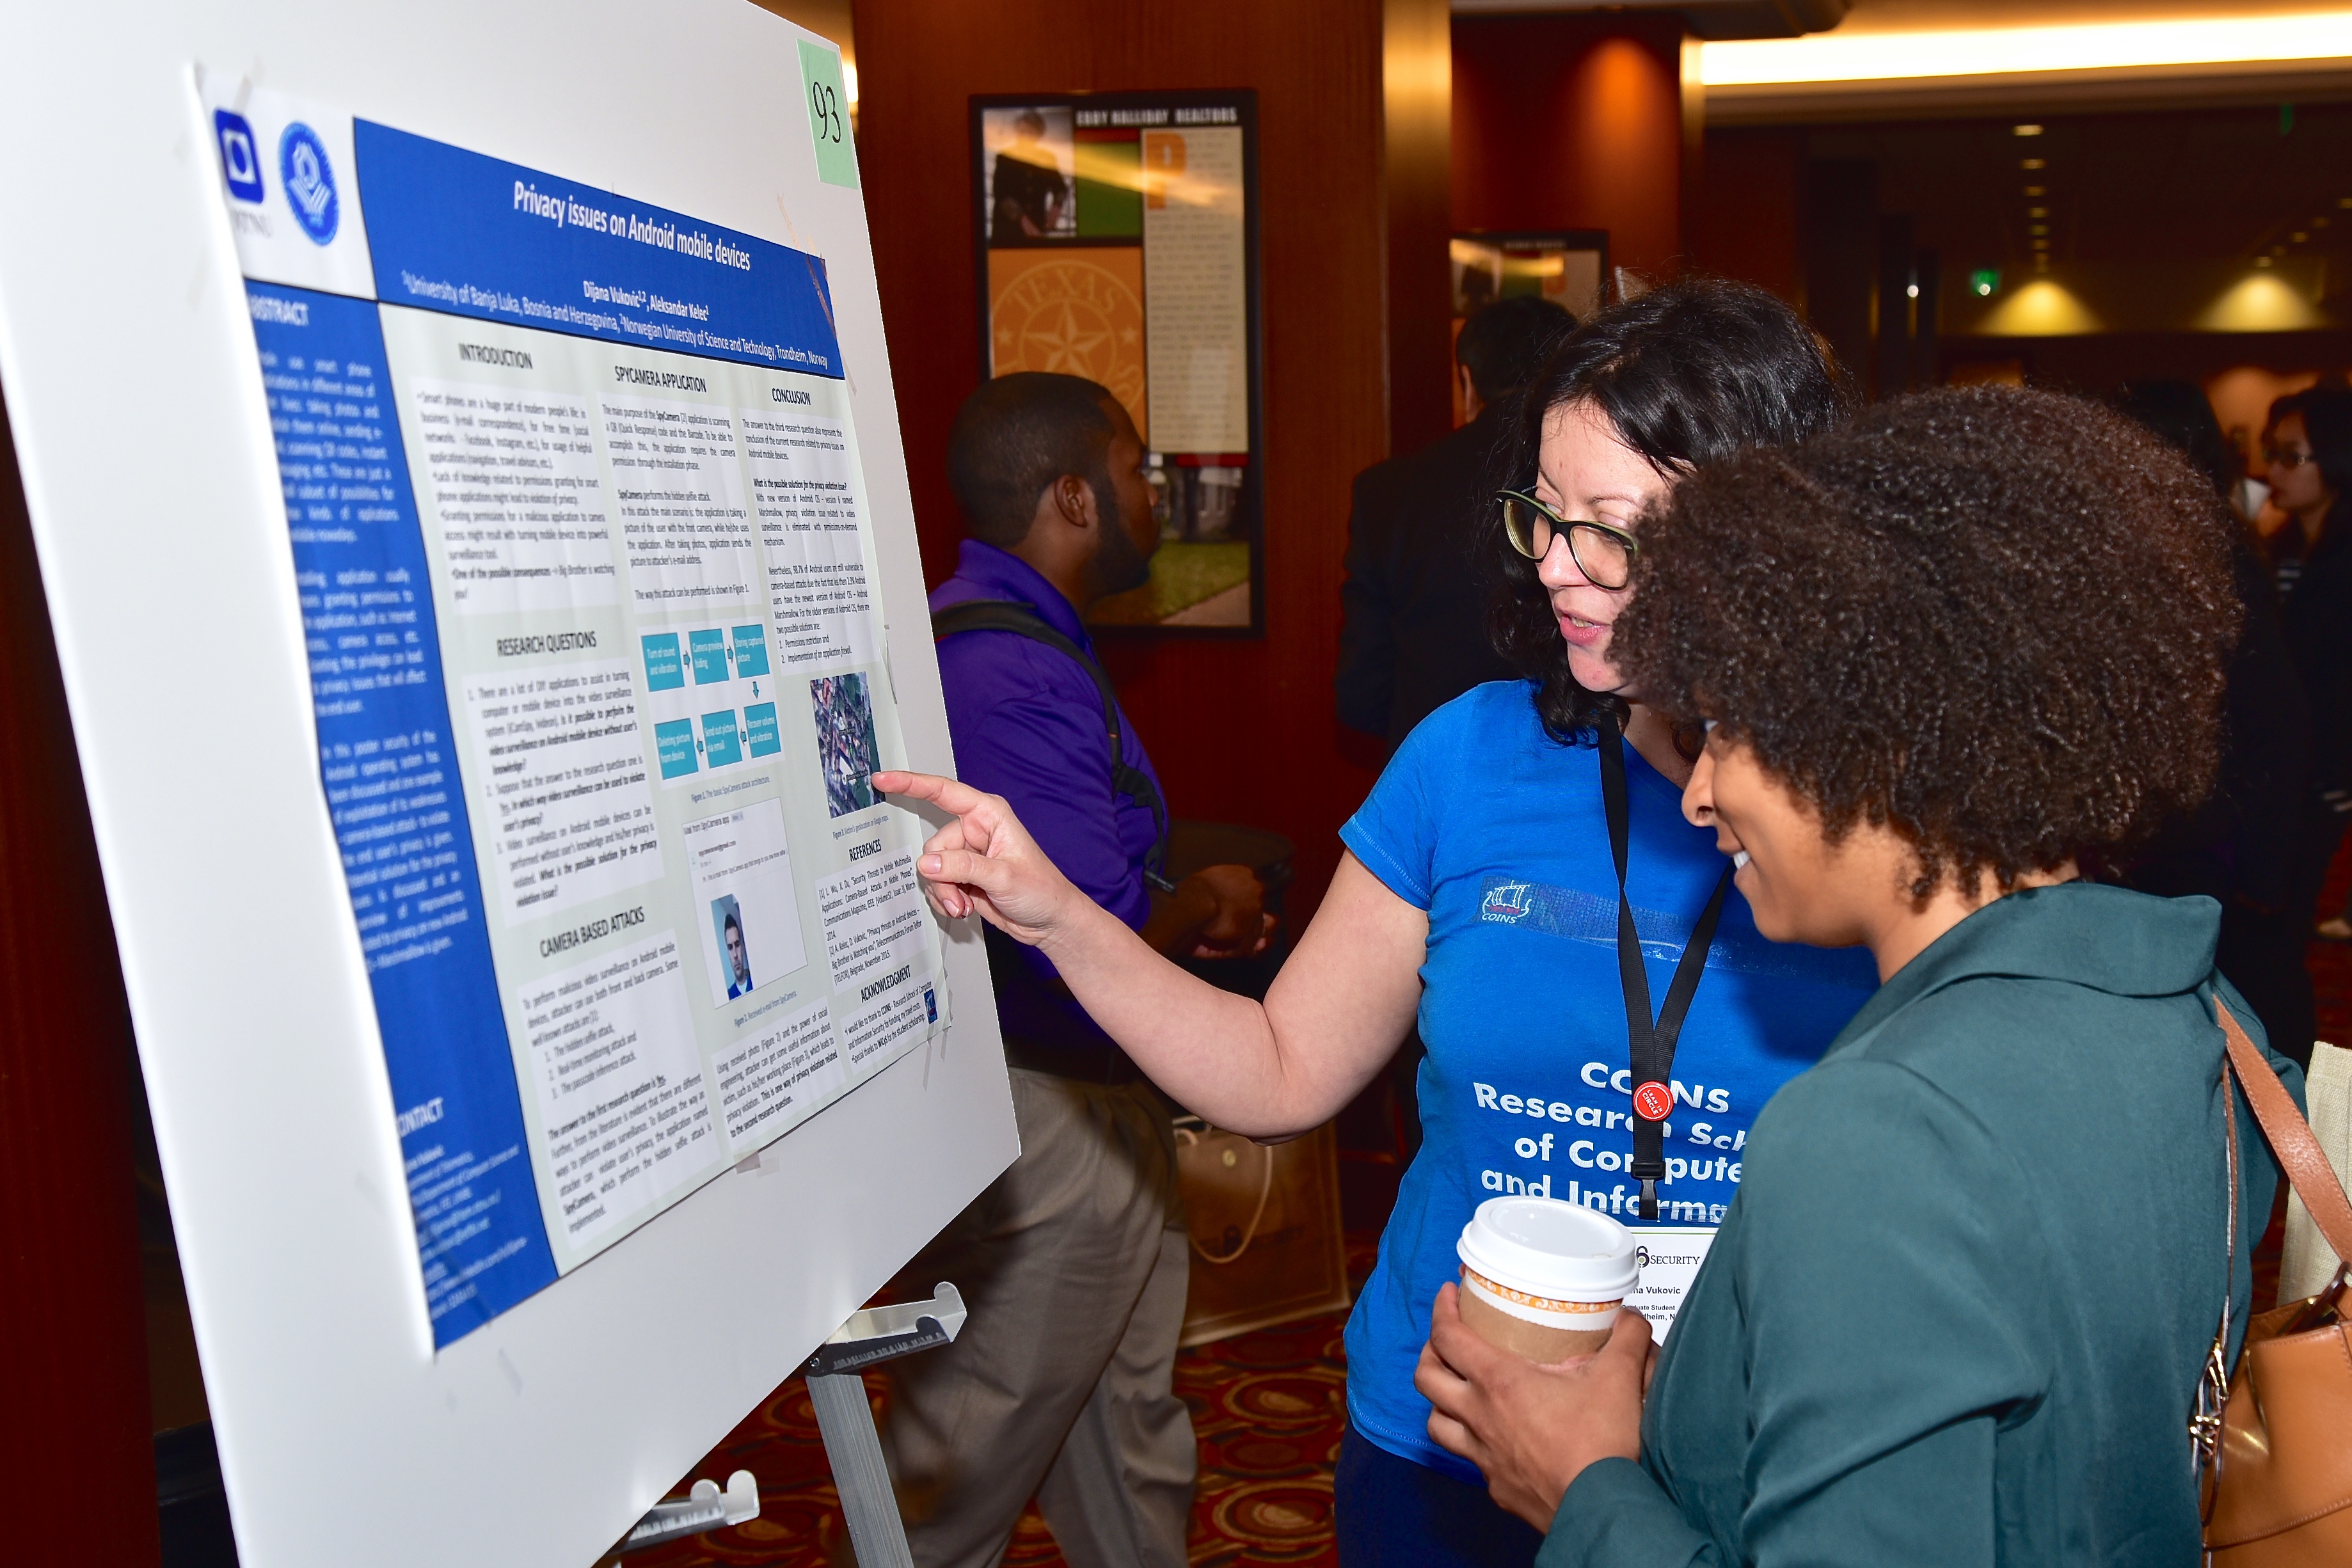 WiCyS 2016 - poster session